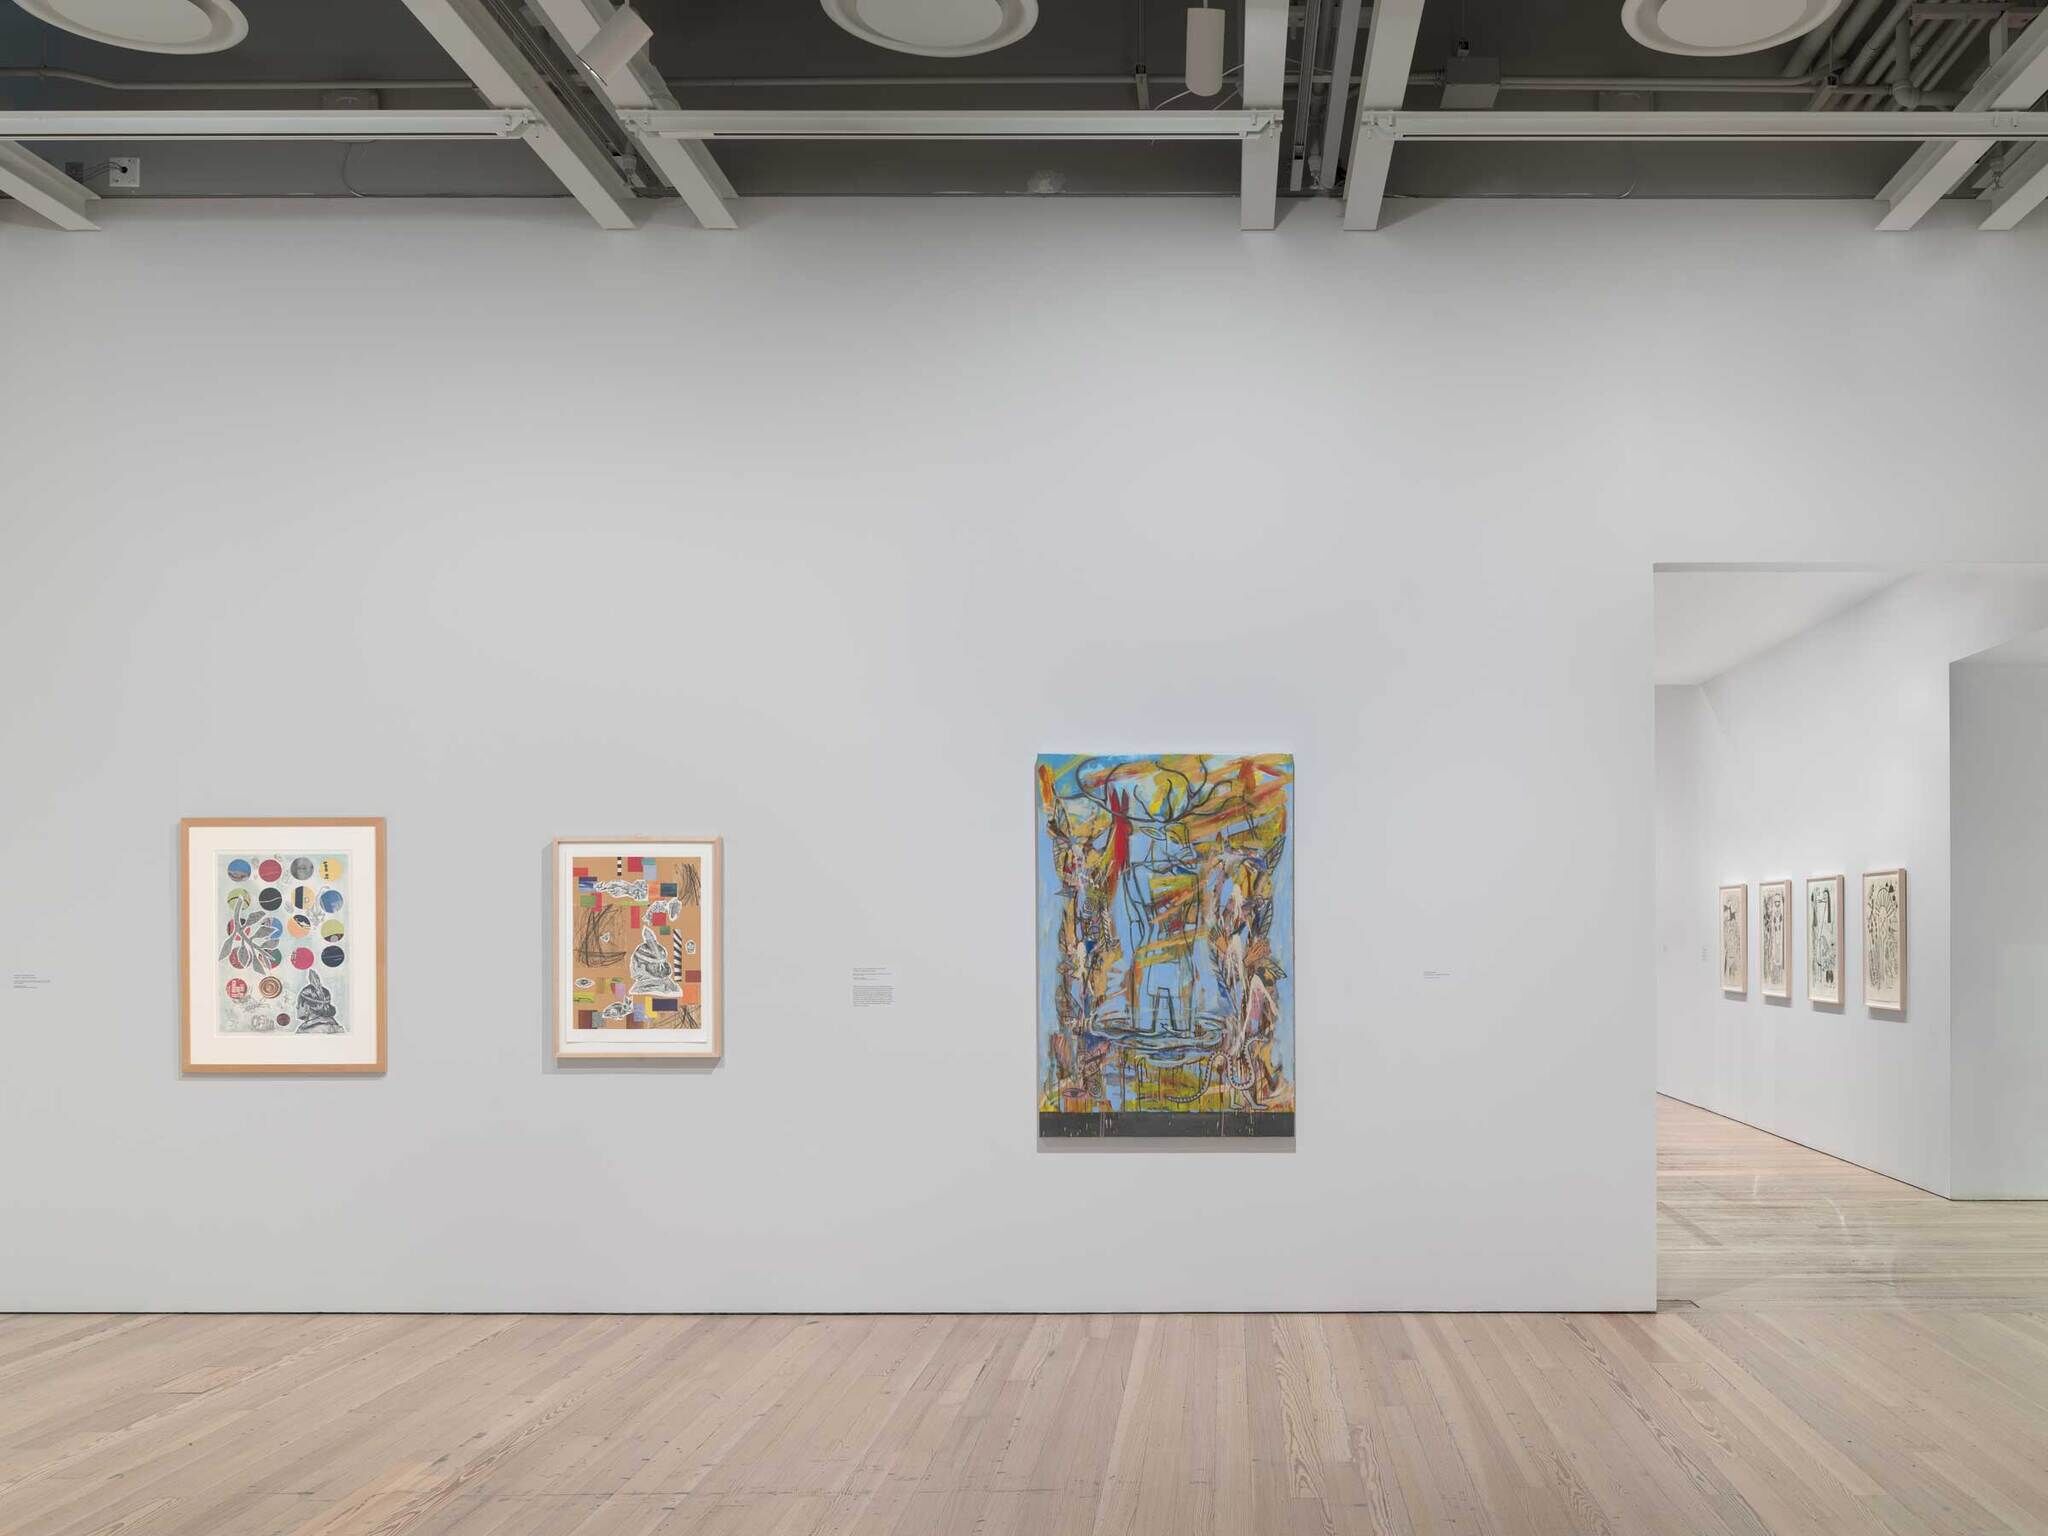 From left to right: a painting with colorful abstract circles, a painting with abstract shapes, and a colorful painting of a human figure with a deer head.